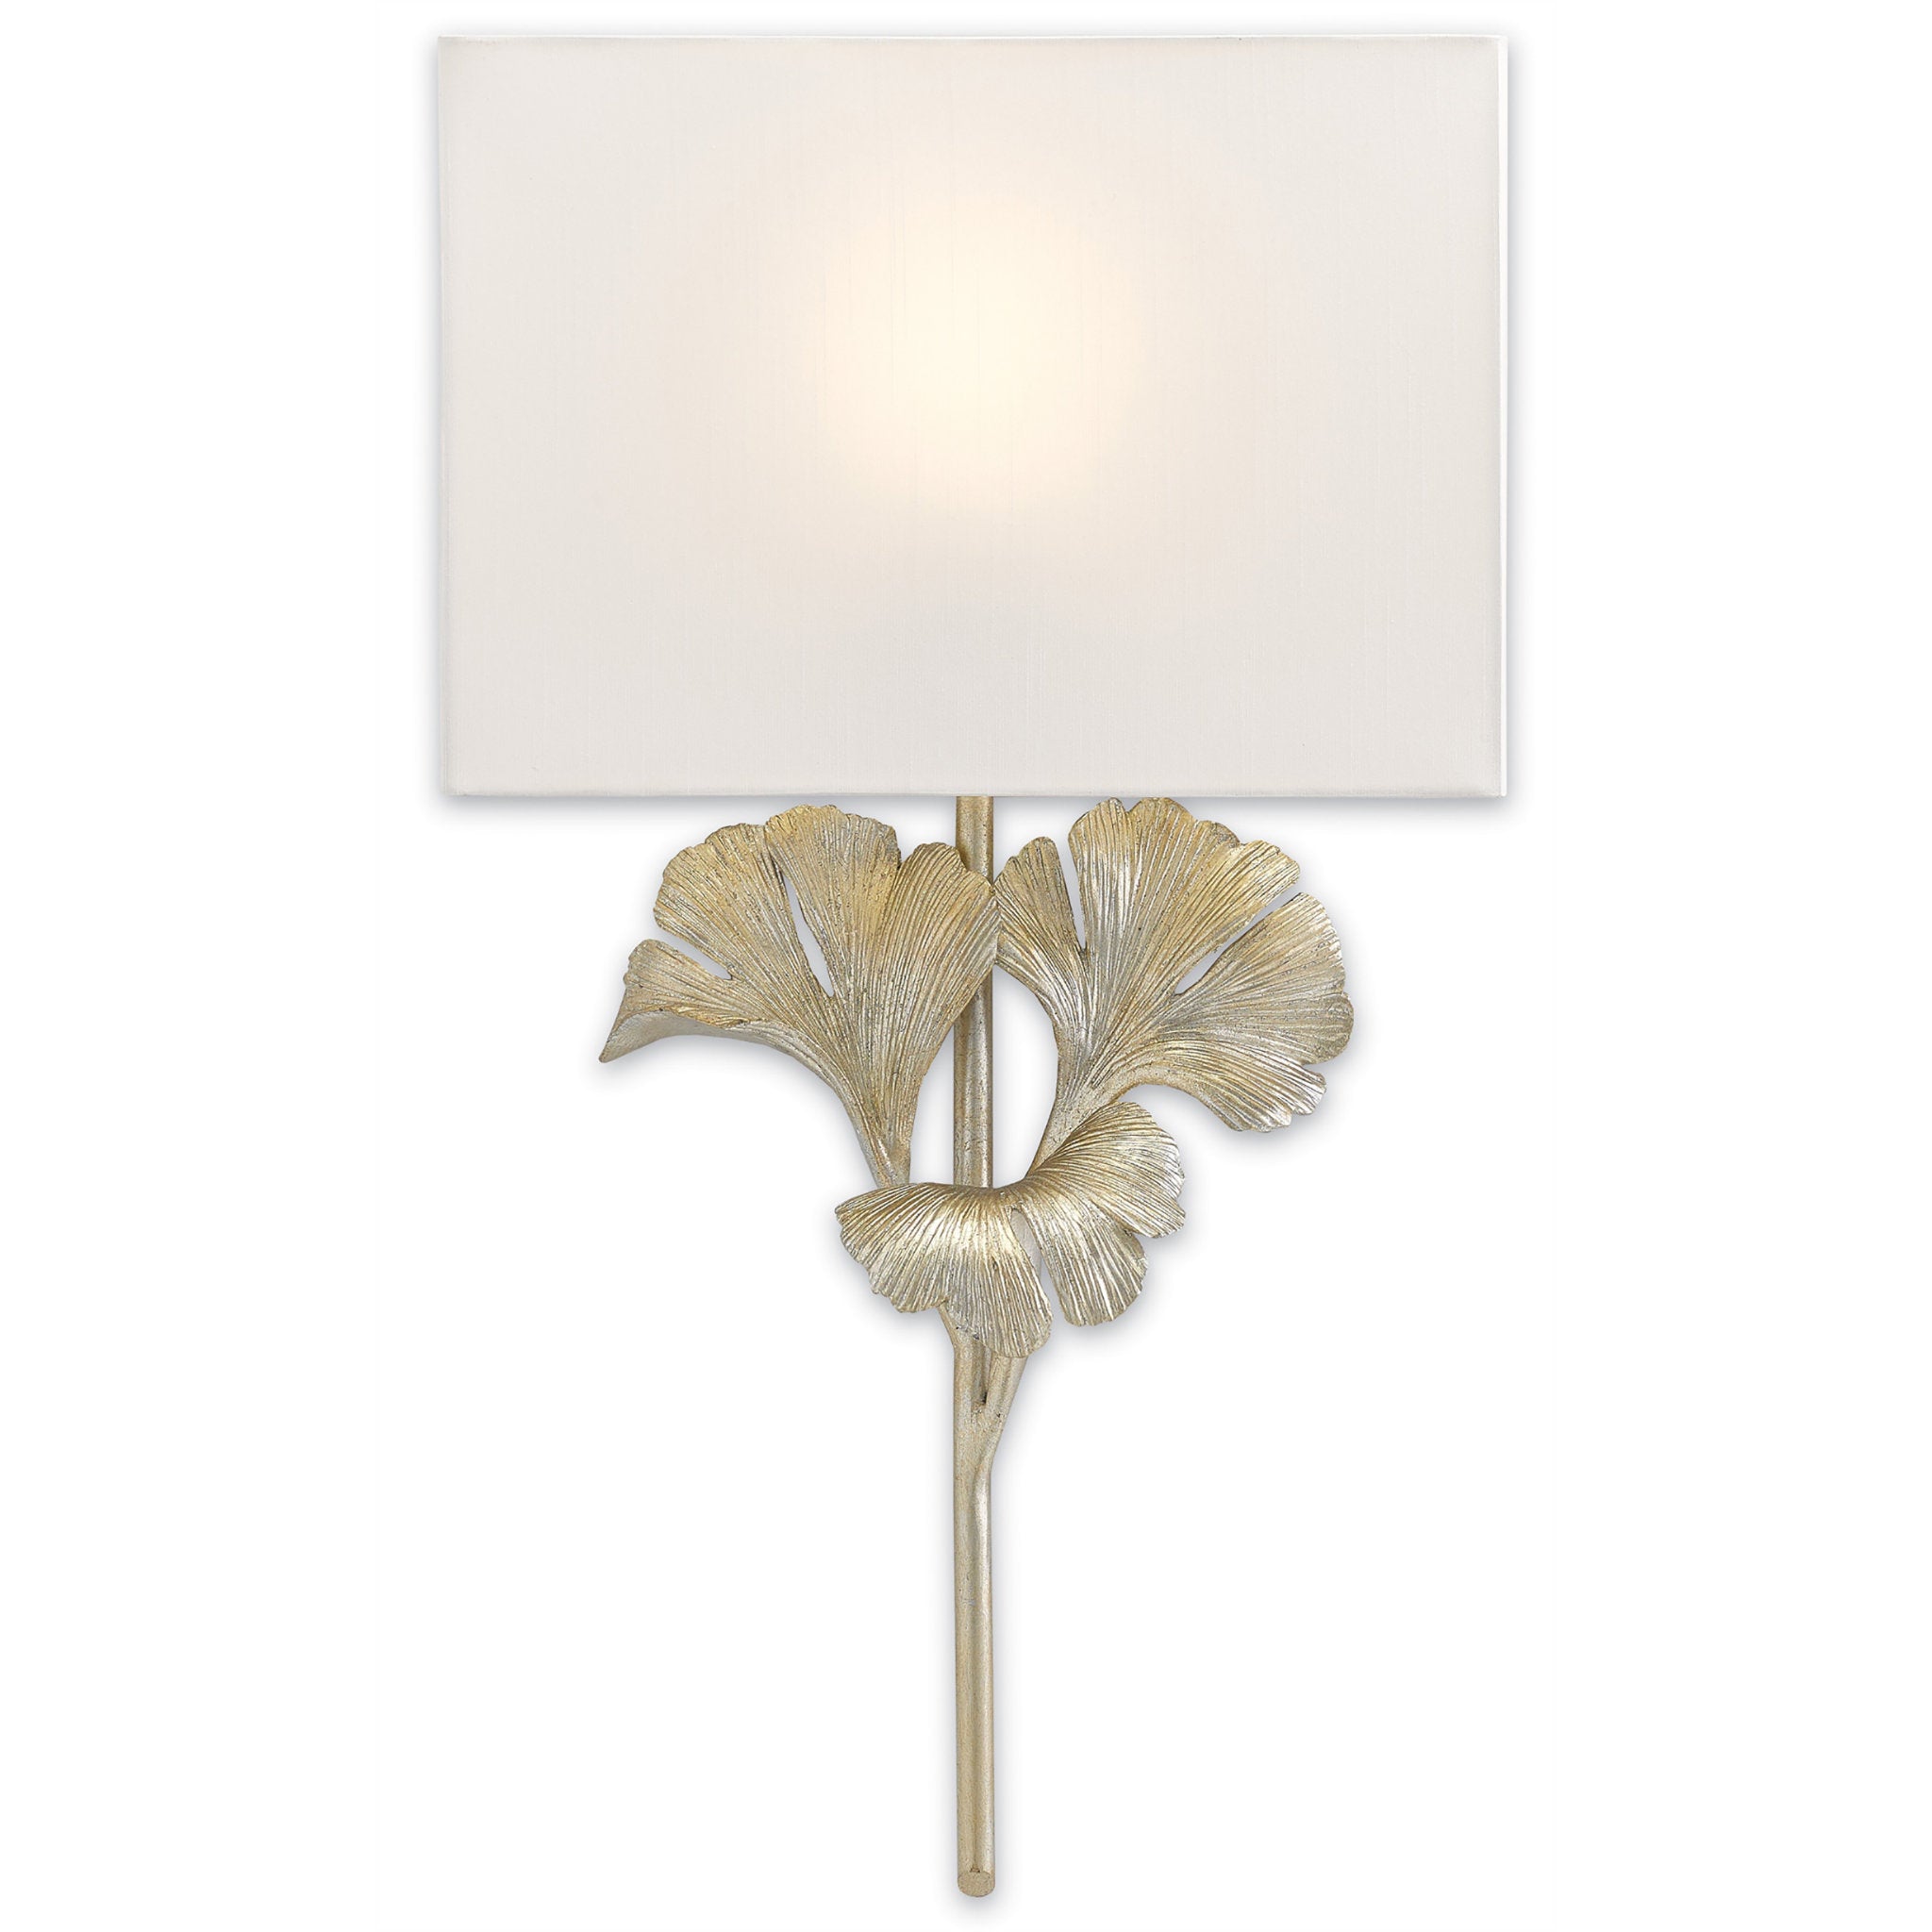 Gingko Silver Wall Sconce - Distressed Silver Leaf